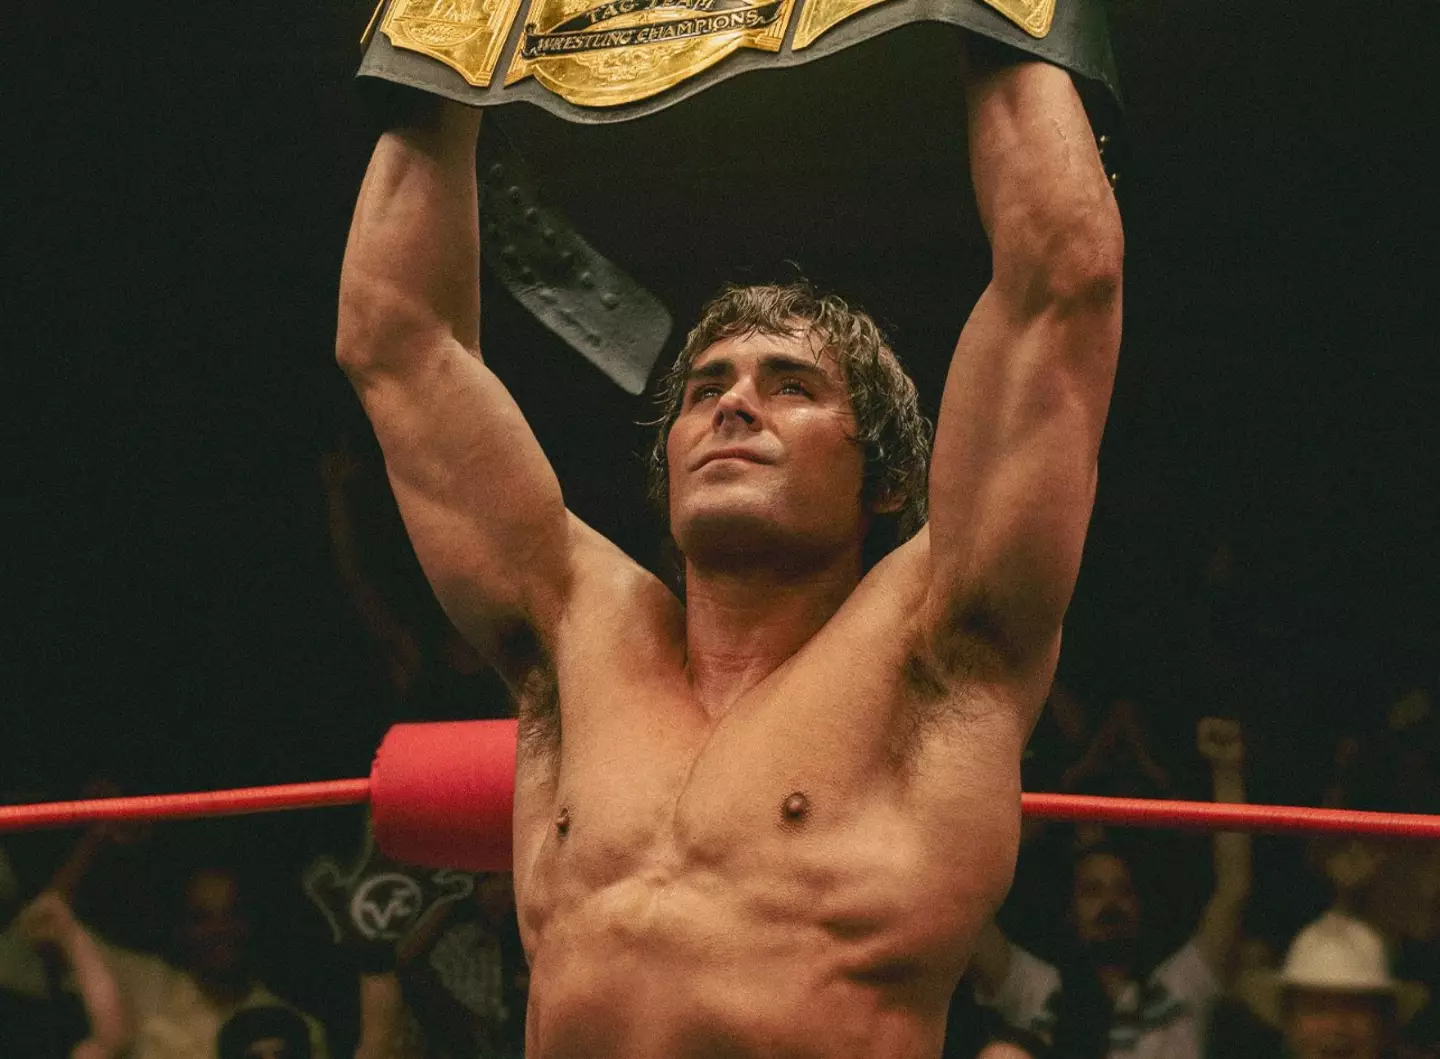 Zac Efron's upcoming movie sees him take on the role of a wrestler.